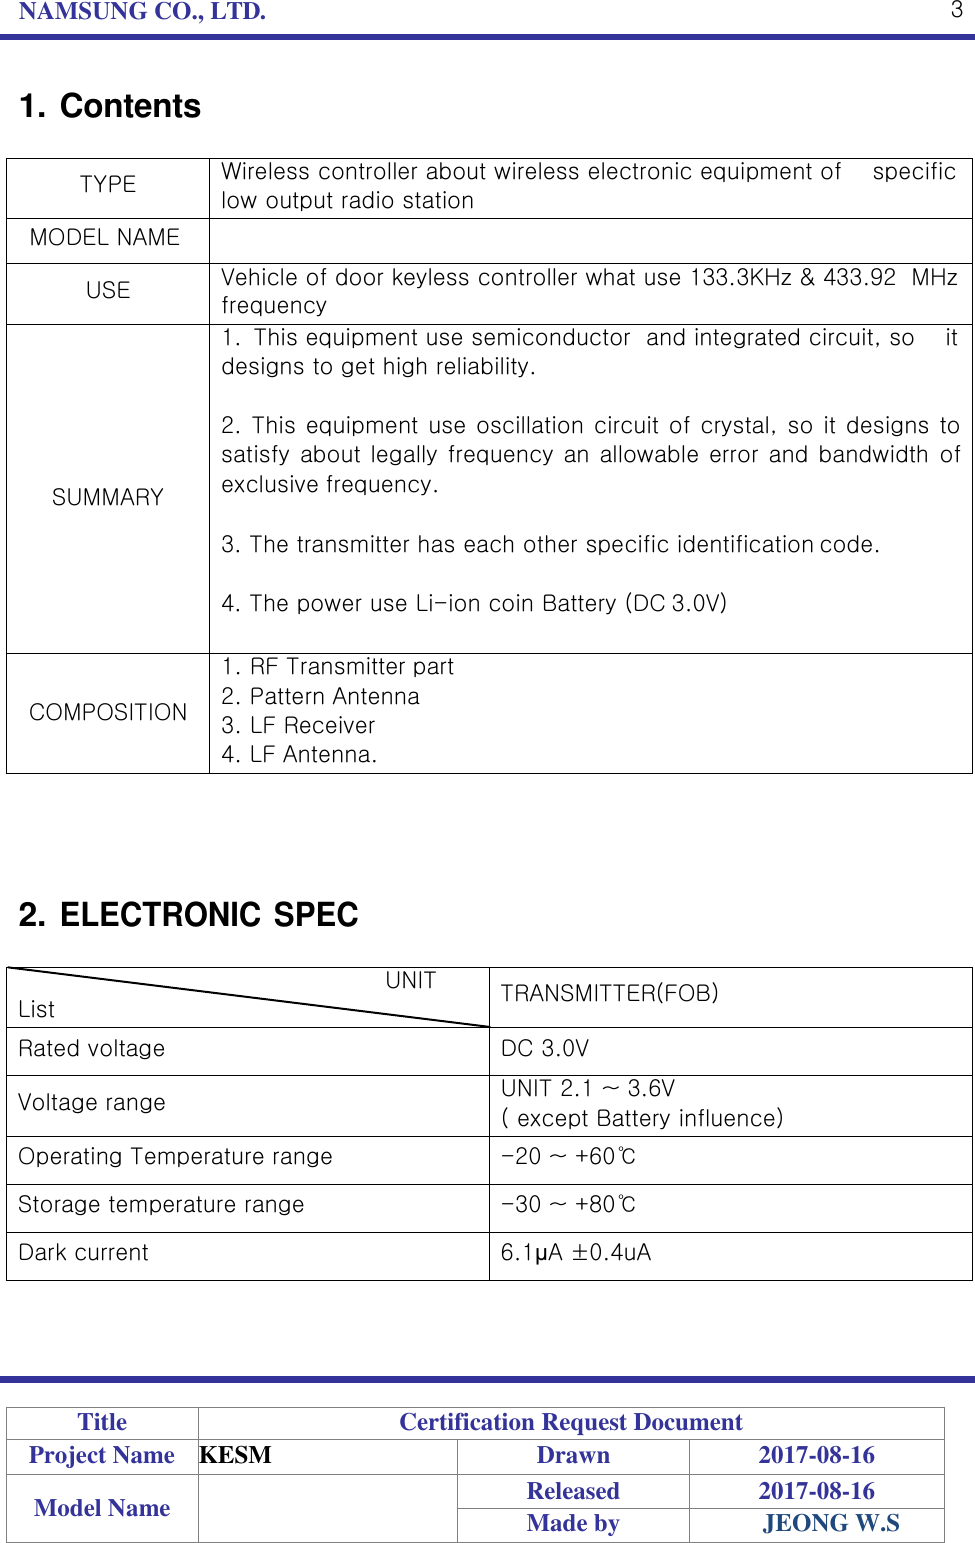 NAMSUNG CO., LTD. 3    1. Contents  TYPE Wireless controller about wireless electronic equipment of    specific low output radio station MODEL NAME  USE Vehicle of door keyless controller what use 133.3KHz &amp; 433.92  MHz frequency      SUMMARY 1. This equipment use semiconductor  and integrated circuit, so    it designs to get high reliability.  2. This equipment use oscillation circuit of crystal, so it designs to satisfy about legally frequency an allowable error and bandwidth  of exclusive frequency.  3. The transmitter has each other specific identification code.  4. The power use Li-ion coin Battery (DC 3.0V)  COMPOSITION 1. RF Transmitter part 2. Pattern Antenna 3. LF Receiver 4. LF Antenna.     2. ELECTRONIC SPEC  UNIT List TRANSMITTER(FOB) Rated voltage DC 3.0V Voltage range UNIT 2.1 ~ 3.6V ( except Battery influence) Operating Temperature range -20 ~ +60℃ Storage temperature range -30 ~ +80℃ Dark current 6.1μA ±0.4uA      Title Certification Request Document Project Name KESM Drawn 2017-08-16 Model Name  Released 2017-08-16 Made by JEONG W.S 